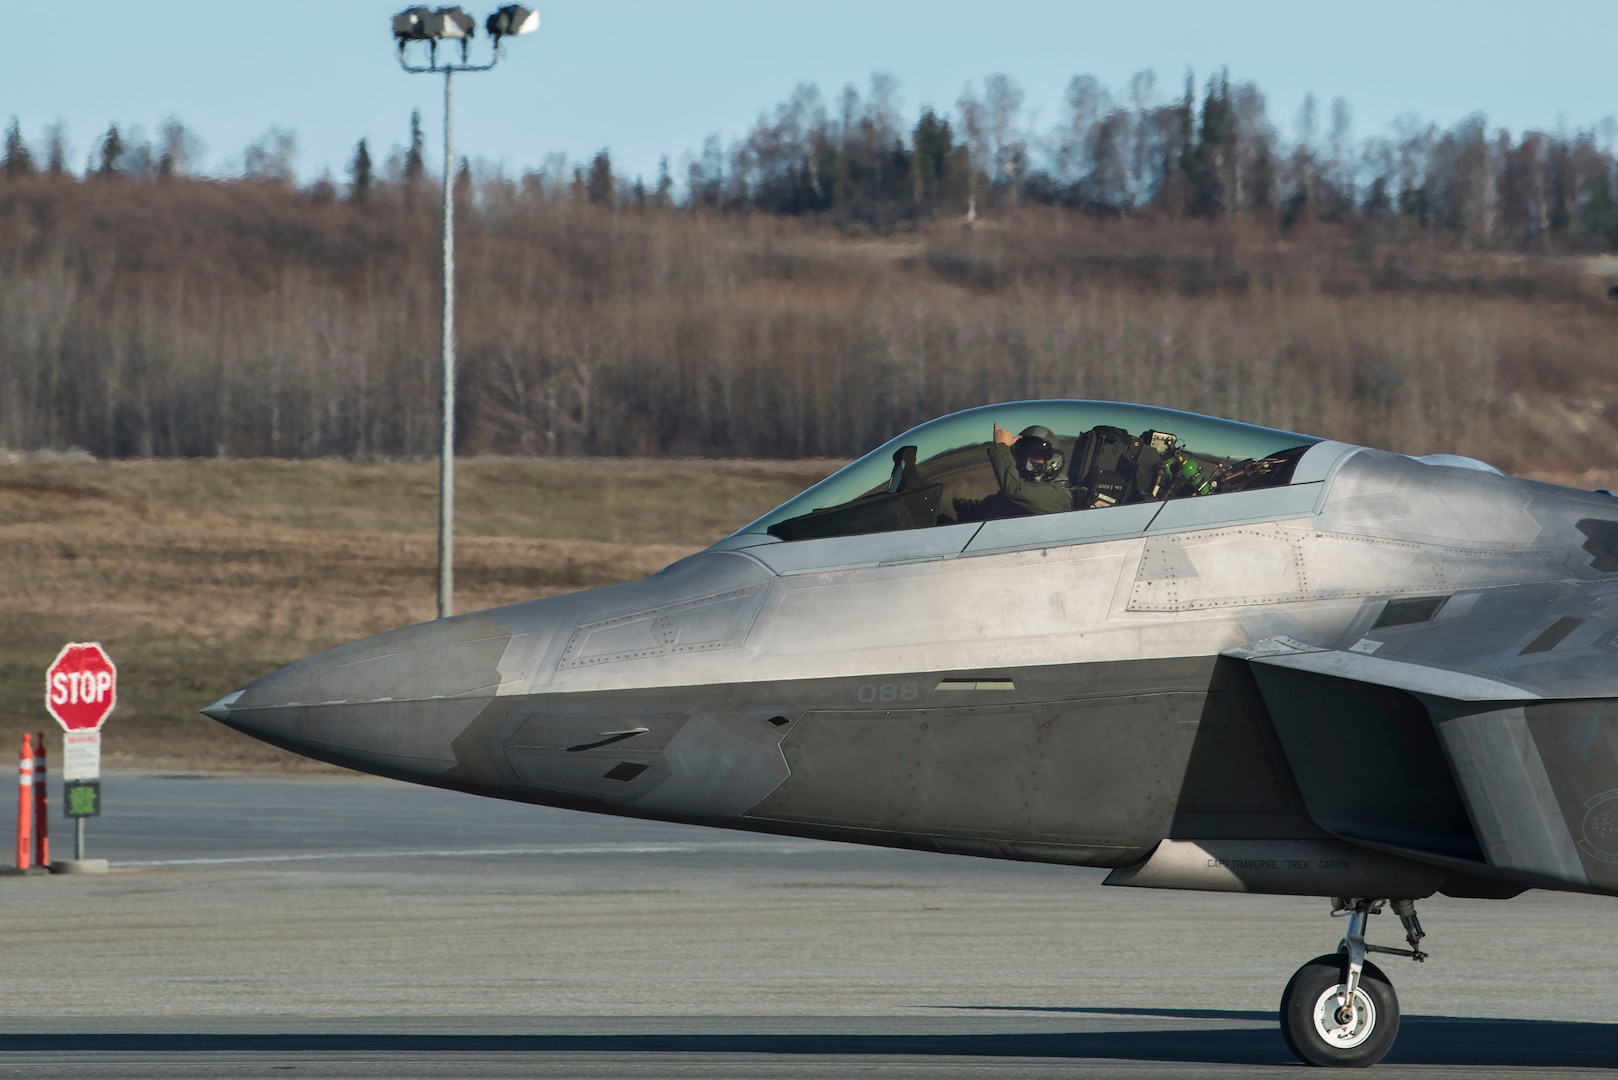 A U.S. Air Force F-22 Raptor taxis onto the runway prior to an elephant walk, May 5, 2020, at Joint Base Elmendorf-Richardson, Alaska. This event displayed the ability of the 3rd Wing, 176th Wing and the 477th Fighter Group to maintain constant readiness throughout COVID-19 by Total Force Integration between active-duty, Guard and Reserve units to continue defending the U.S. homeland and ensuring a free and open Indo-Pacific.